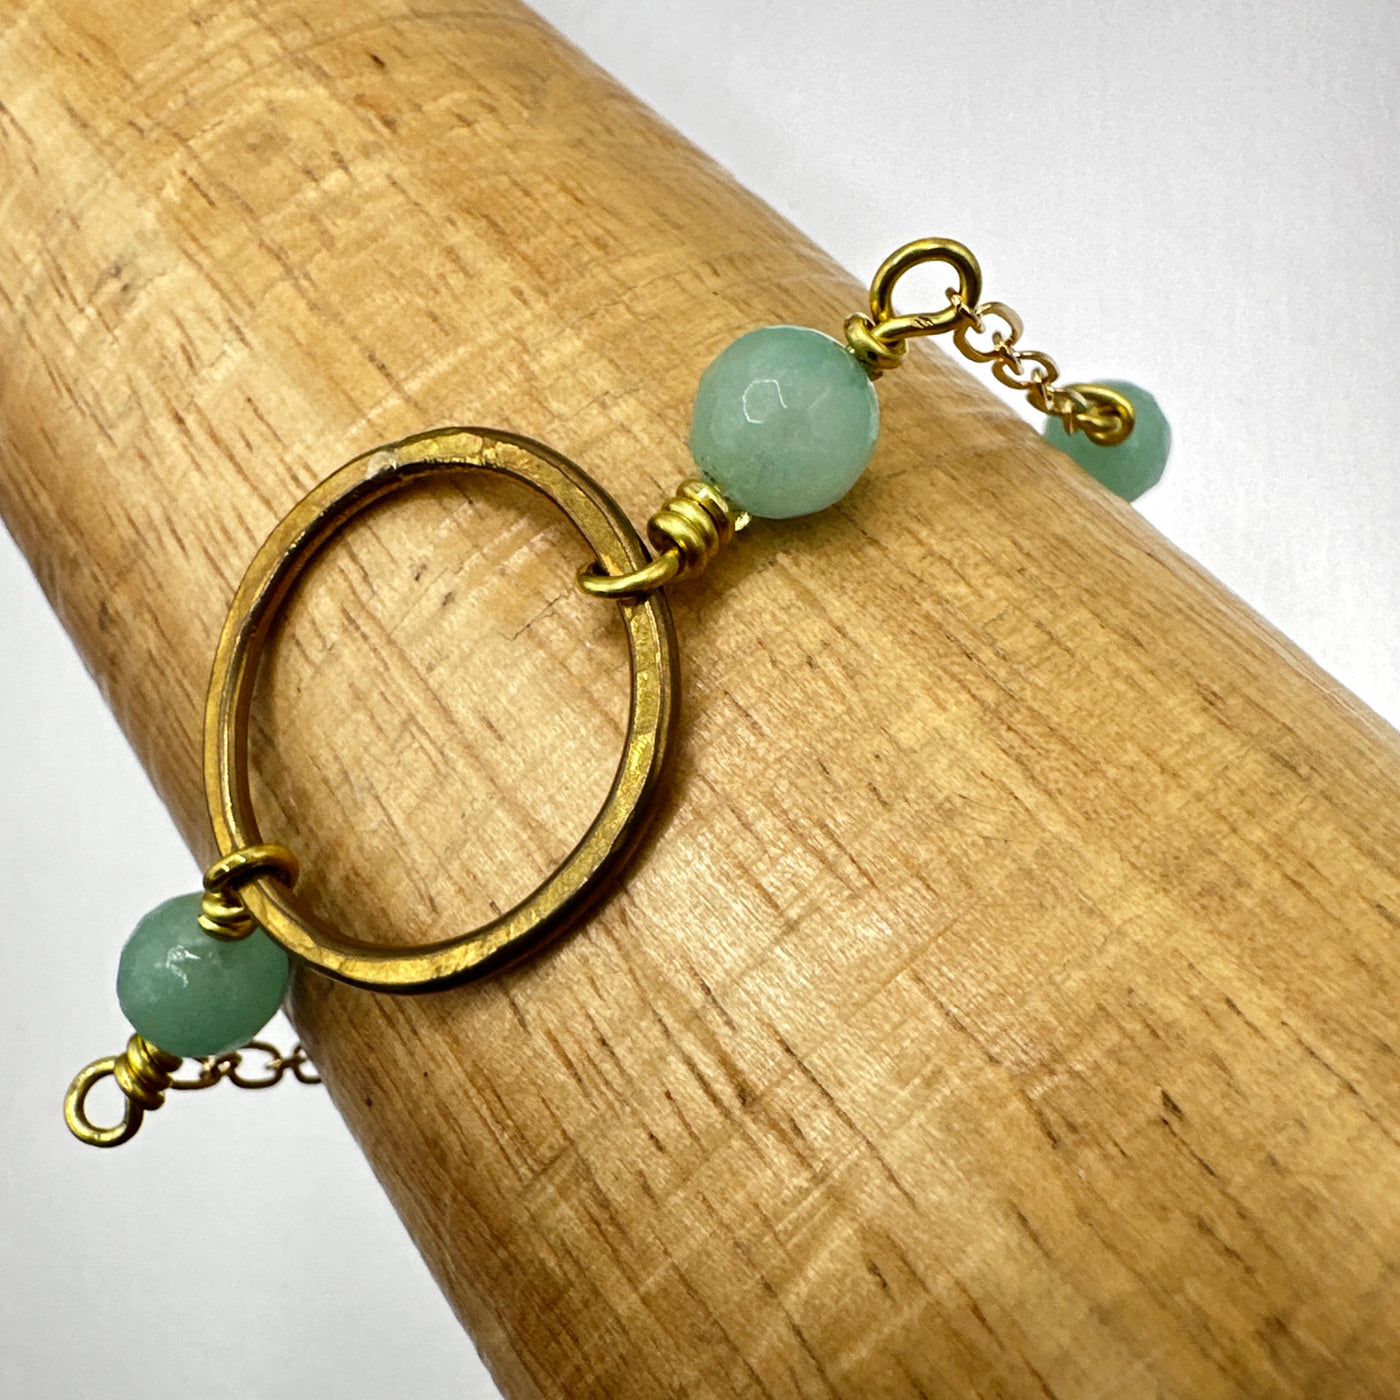 Bracelet with dyed aqua jade faceted round 8 mm beads and brass circle.